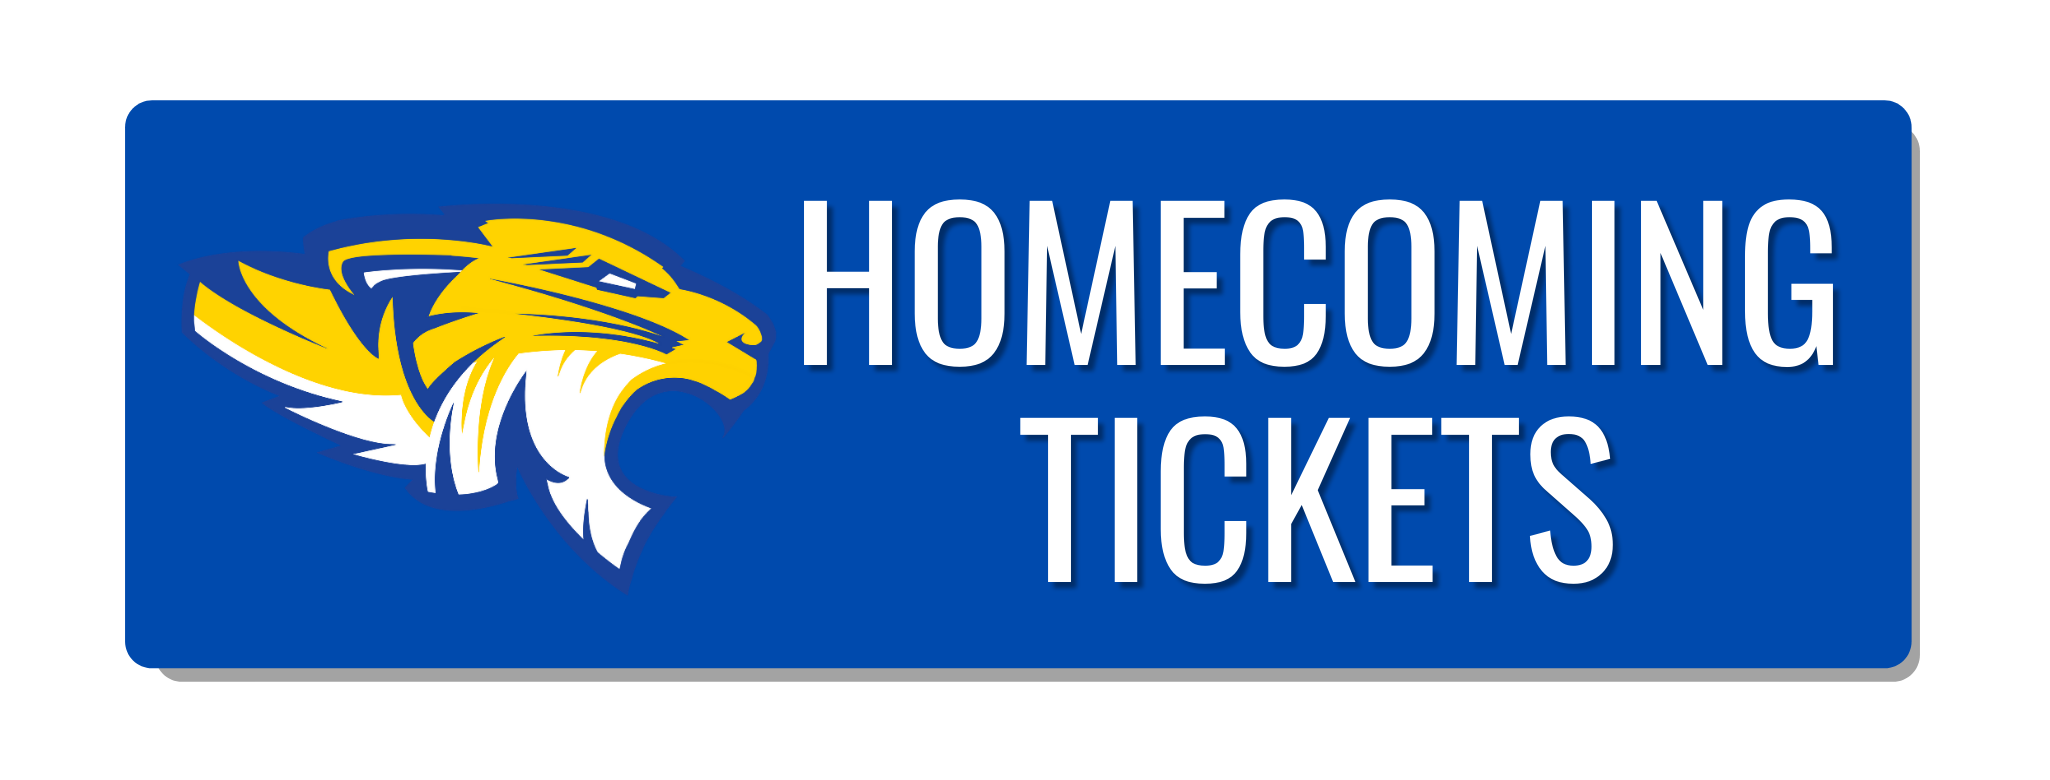 HOMECOMING TICKETS